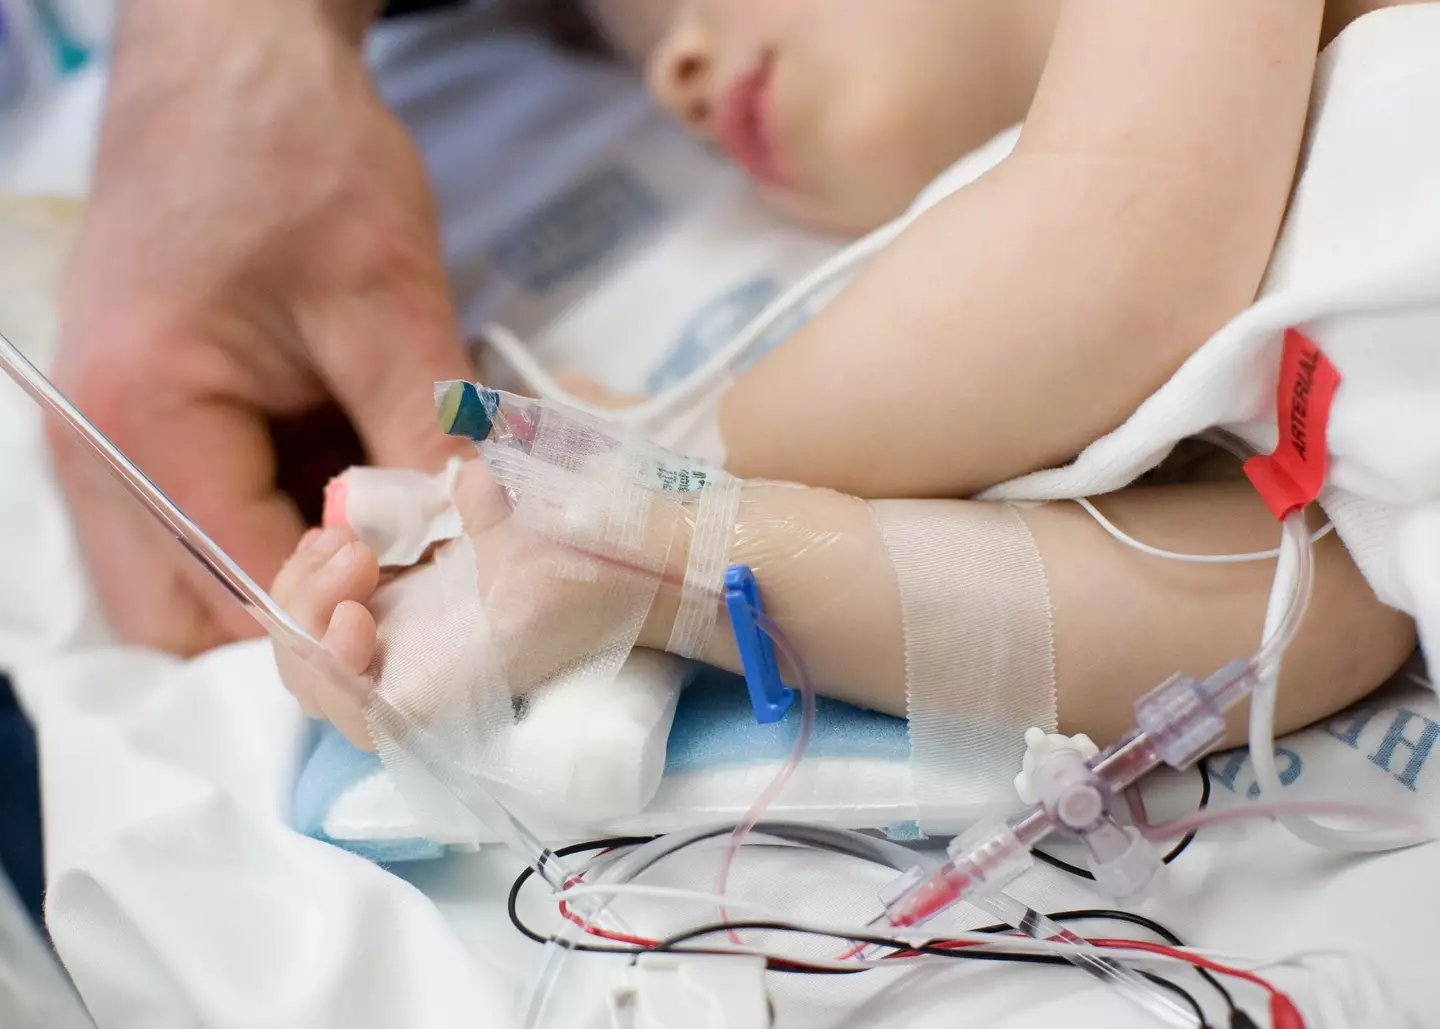 Children exhibiting severe symptoms of sepsis should be taken to A&E.